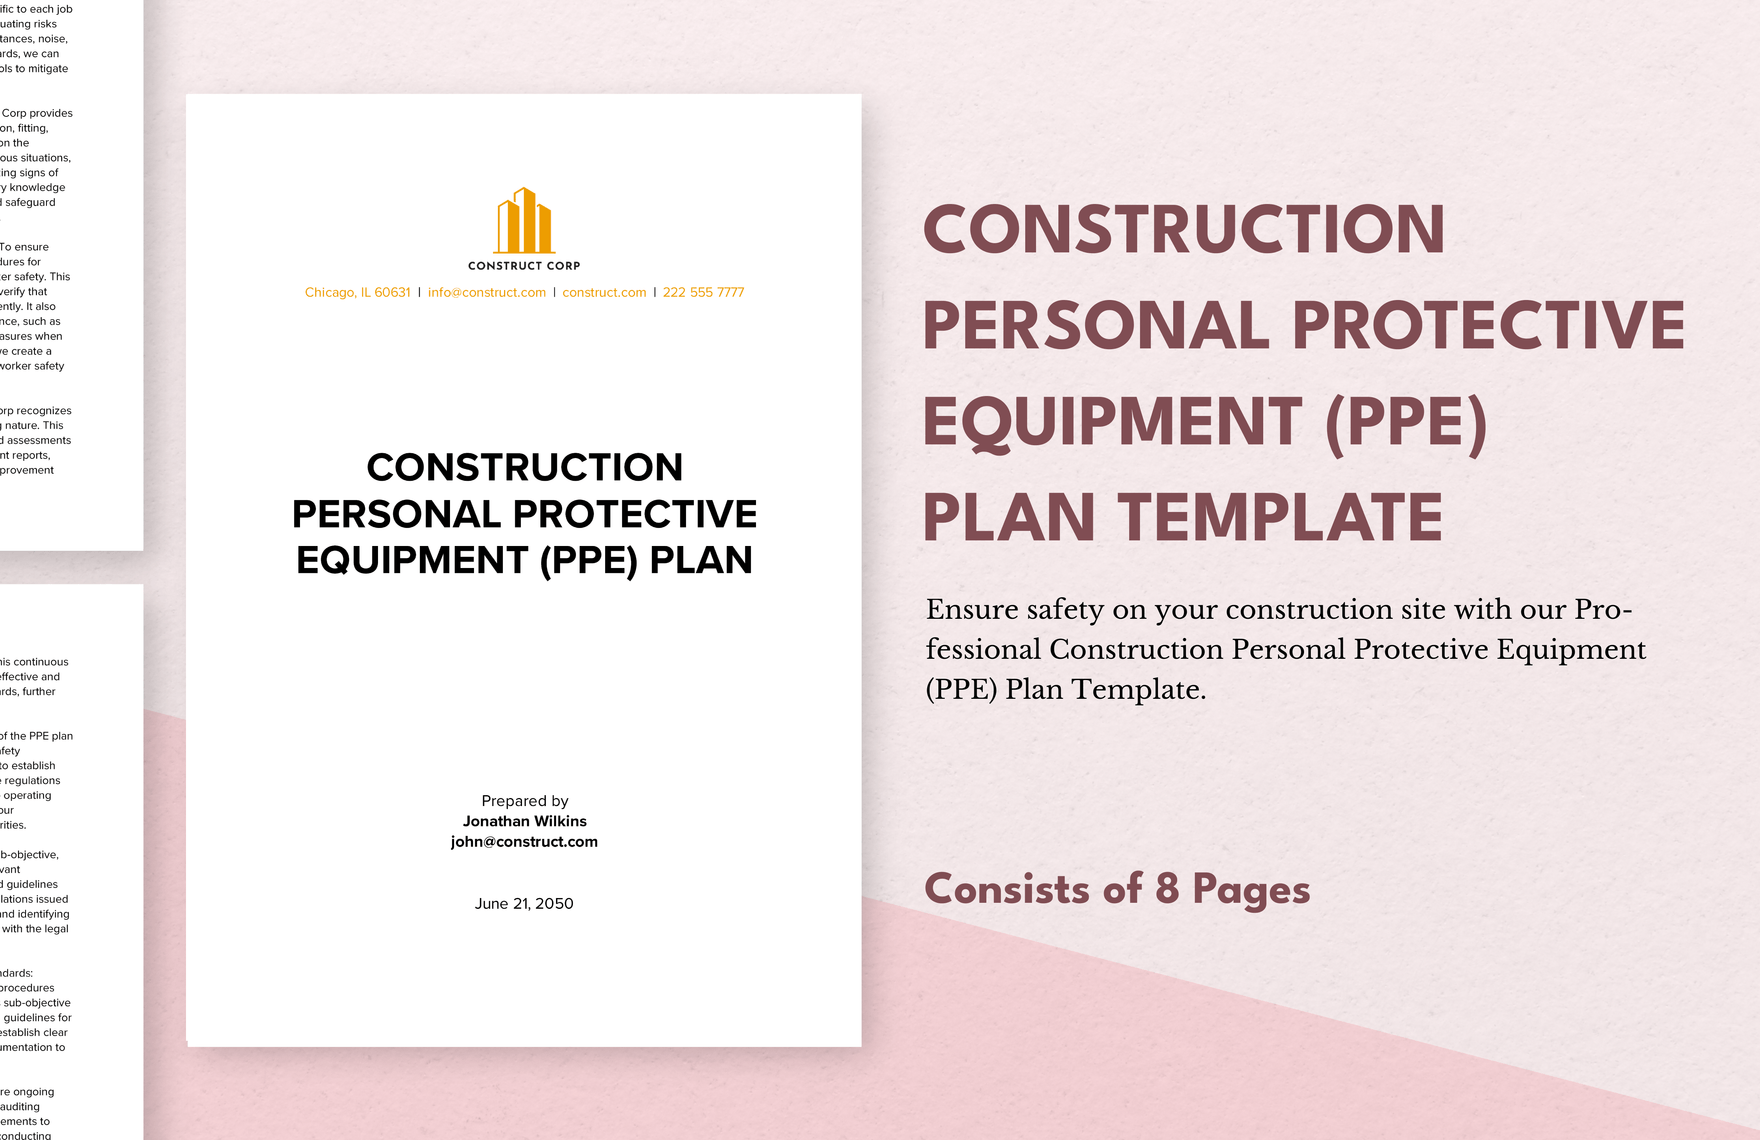 Construction Personal Protective Equipment (PPE) Plan Template